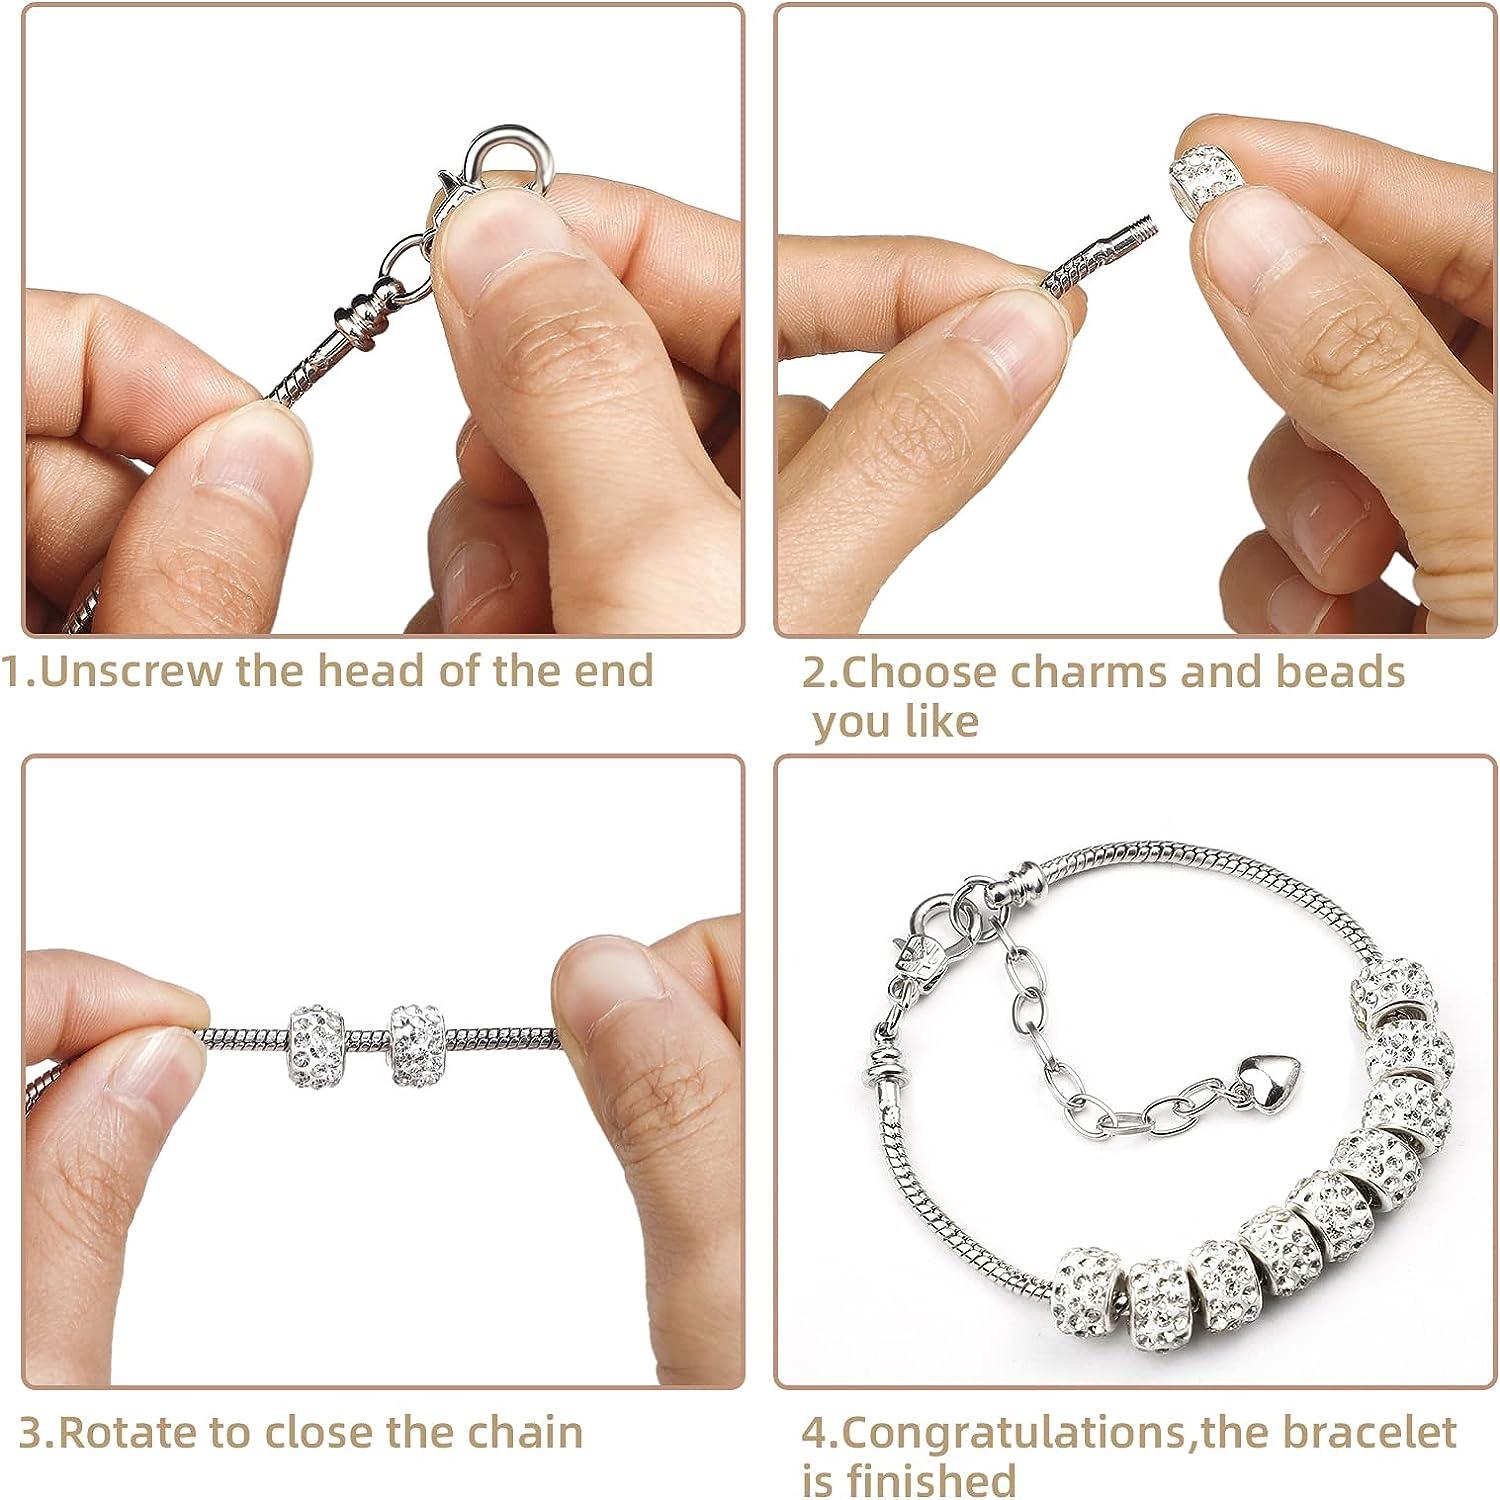 Bracelet extenders - an extremely useful accessory